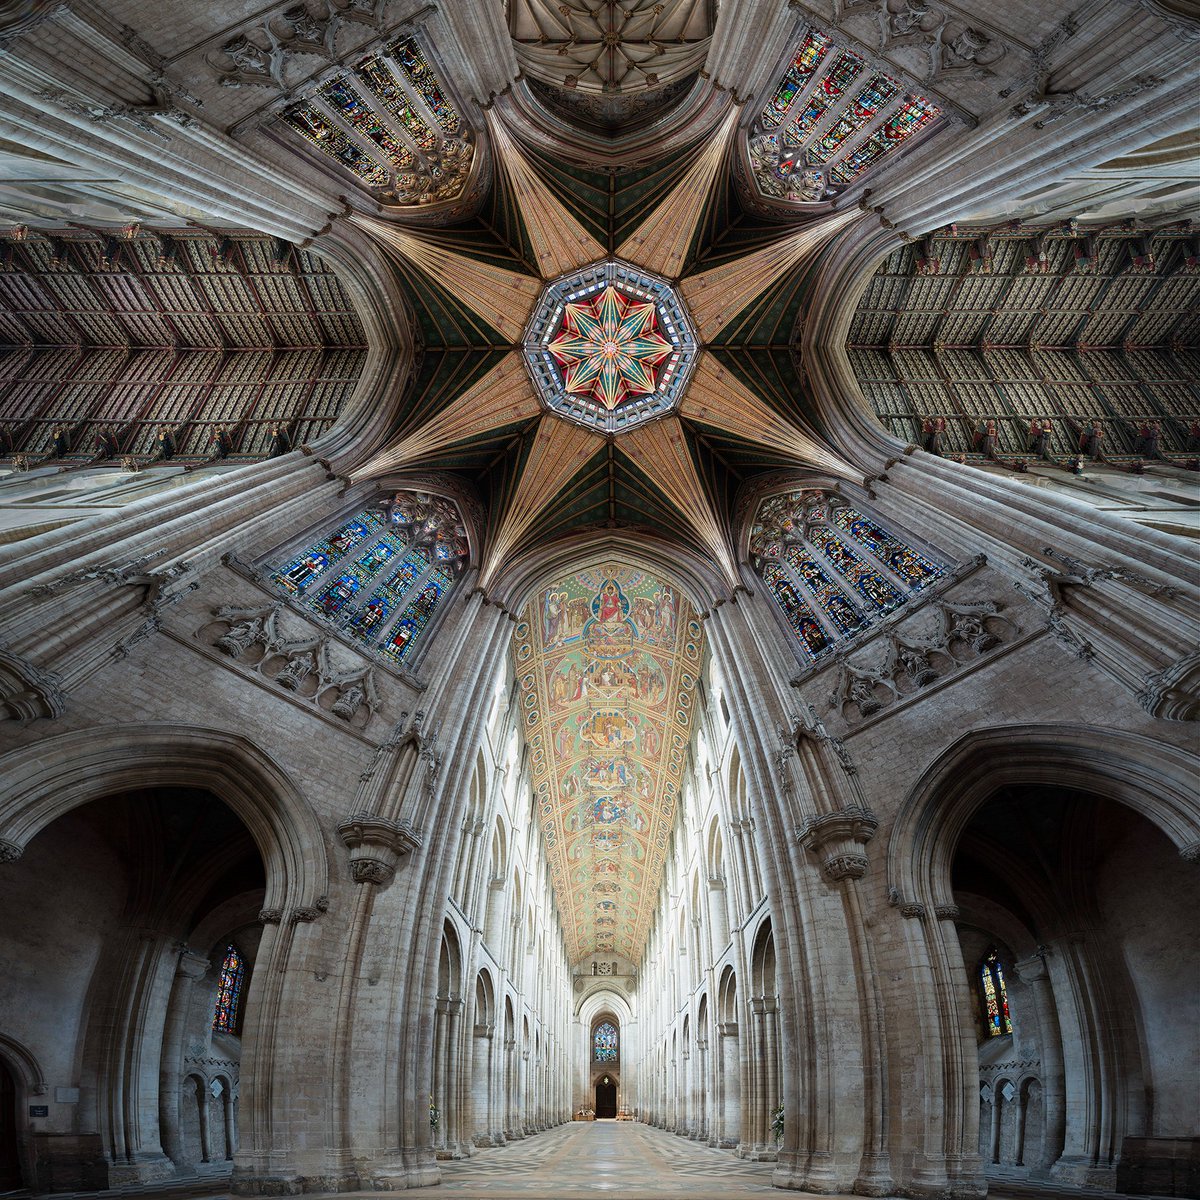 * Visitor Services Manager * We are looking to appoint an experienced tourism or heritage manager to lead the visitor experience here at Ely Cathedral. Find out more and apply by 22 April via our website: elycathedral.org/about/careers/…